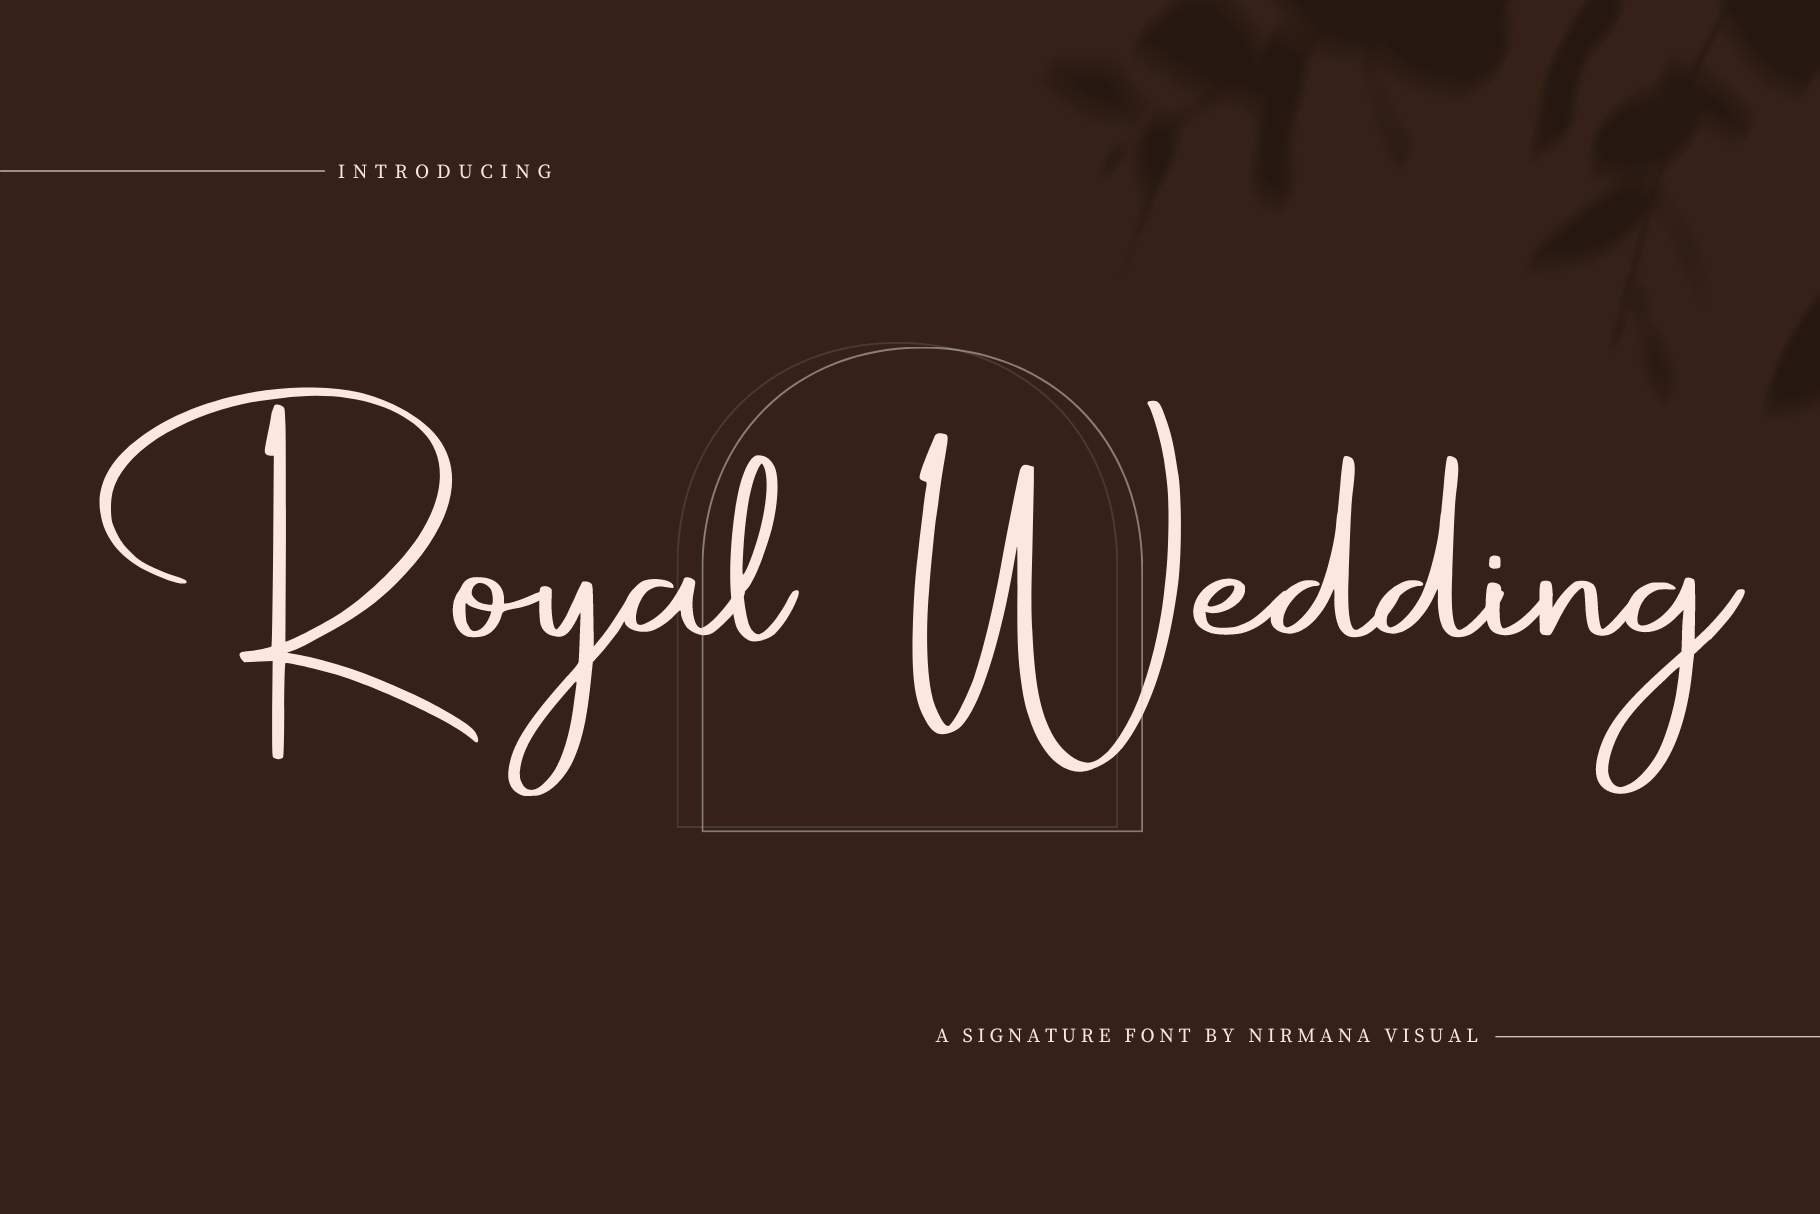 The Royal Wedding is a modern calligraphy font. You can use this for branding projects, invitations, stationery or other graphic design projects.